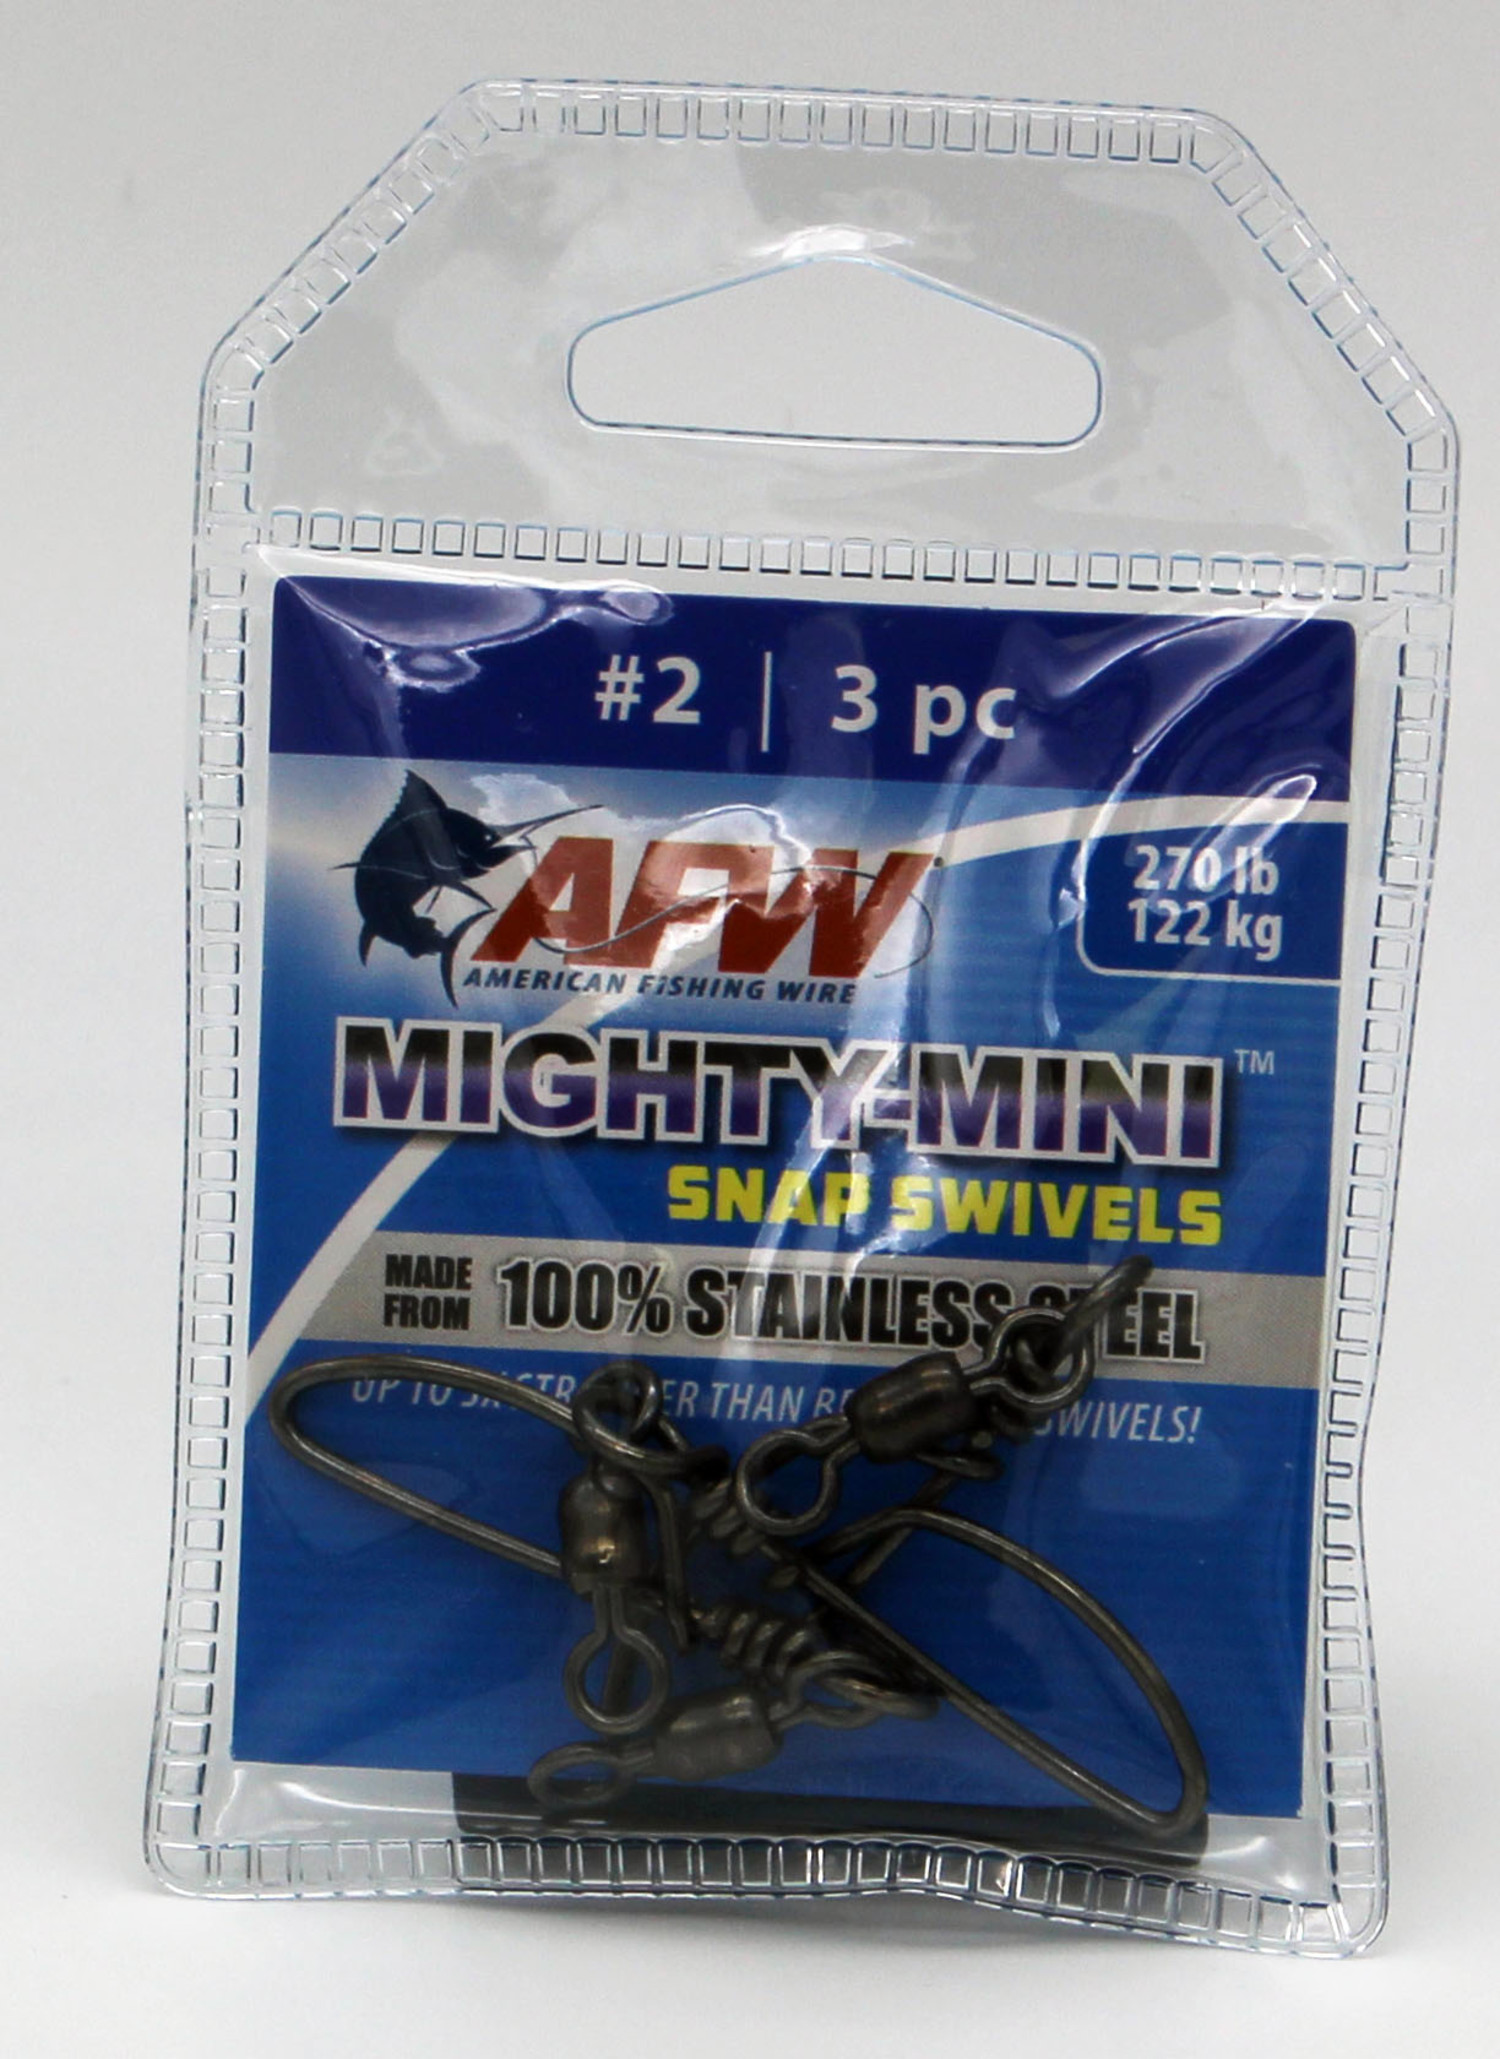 American Fishing Wire AFW Mighty Mini Stainless Steel Snap Swivels